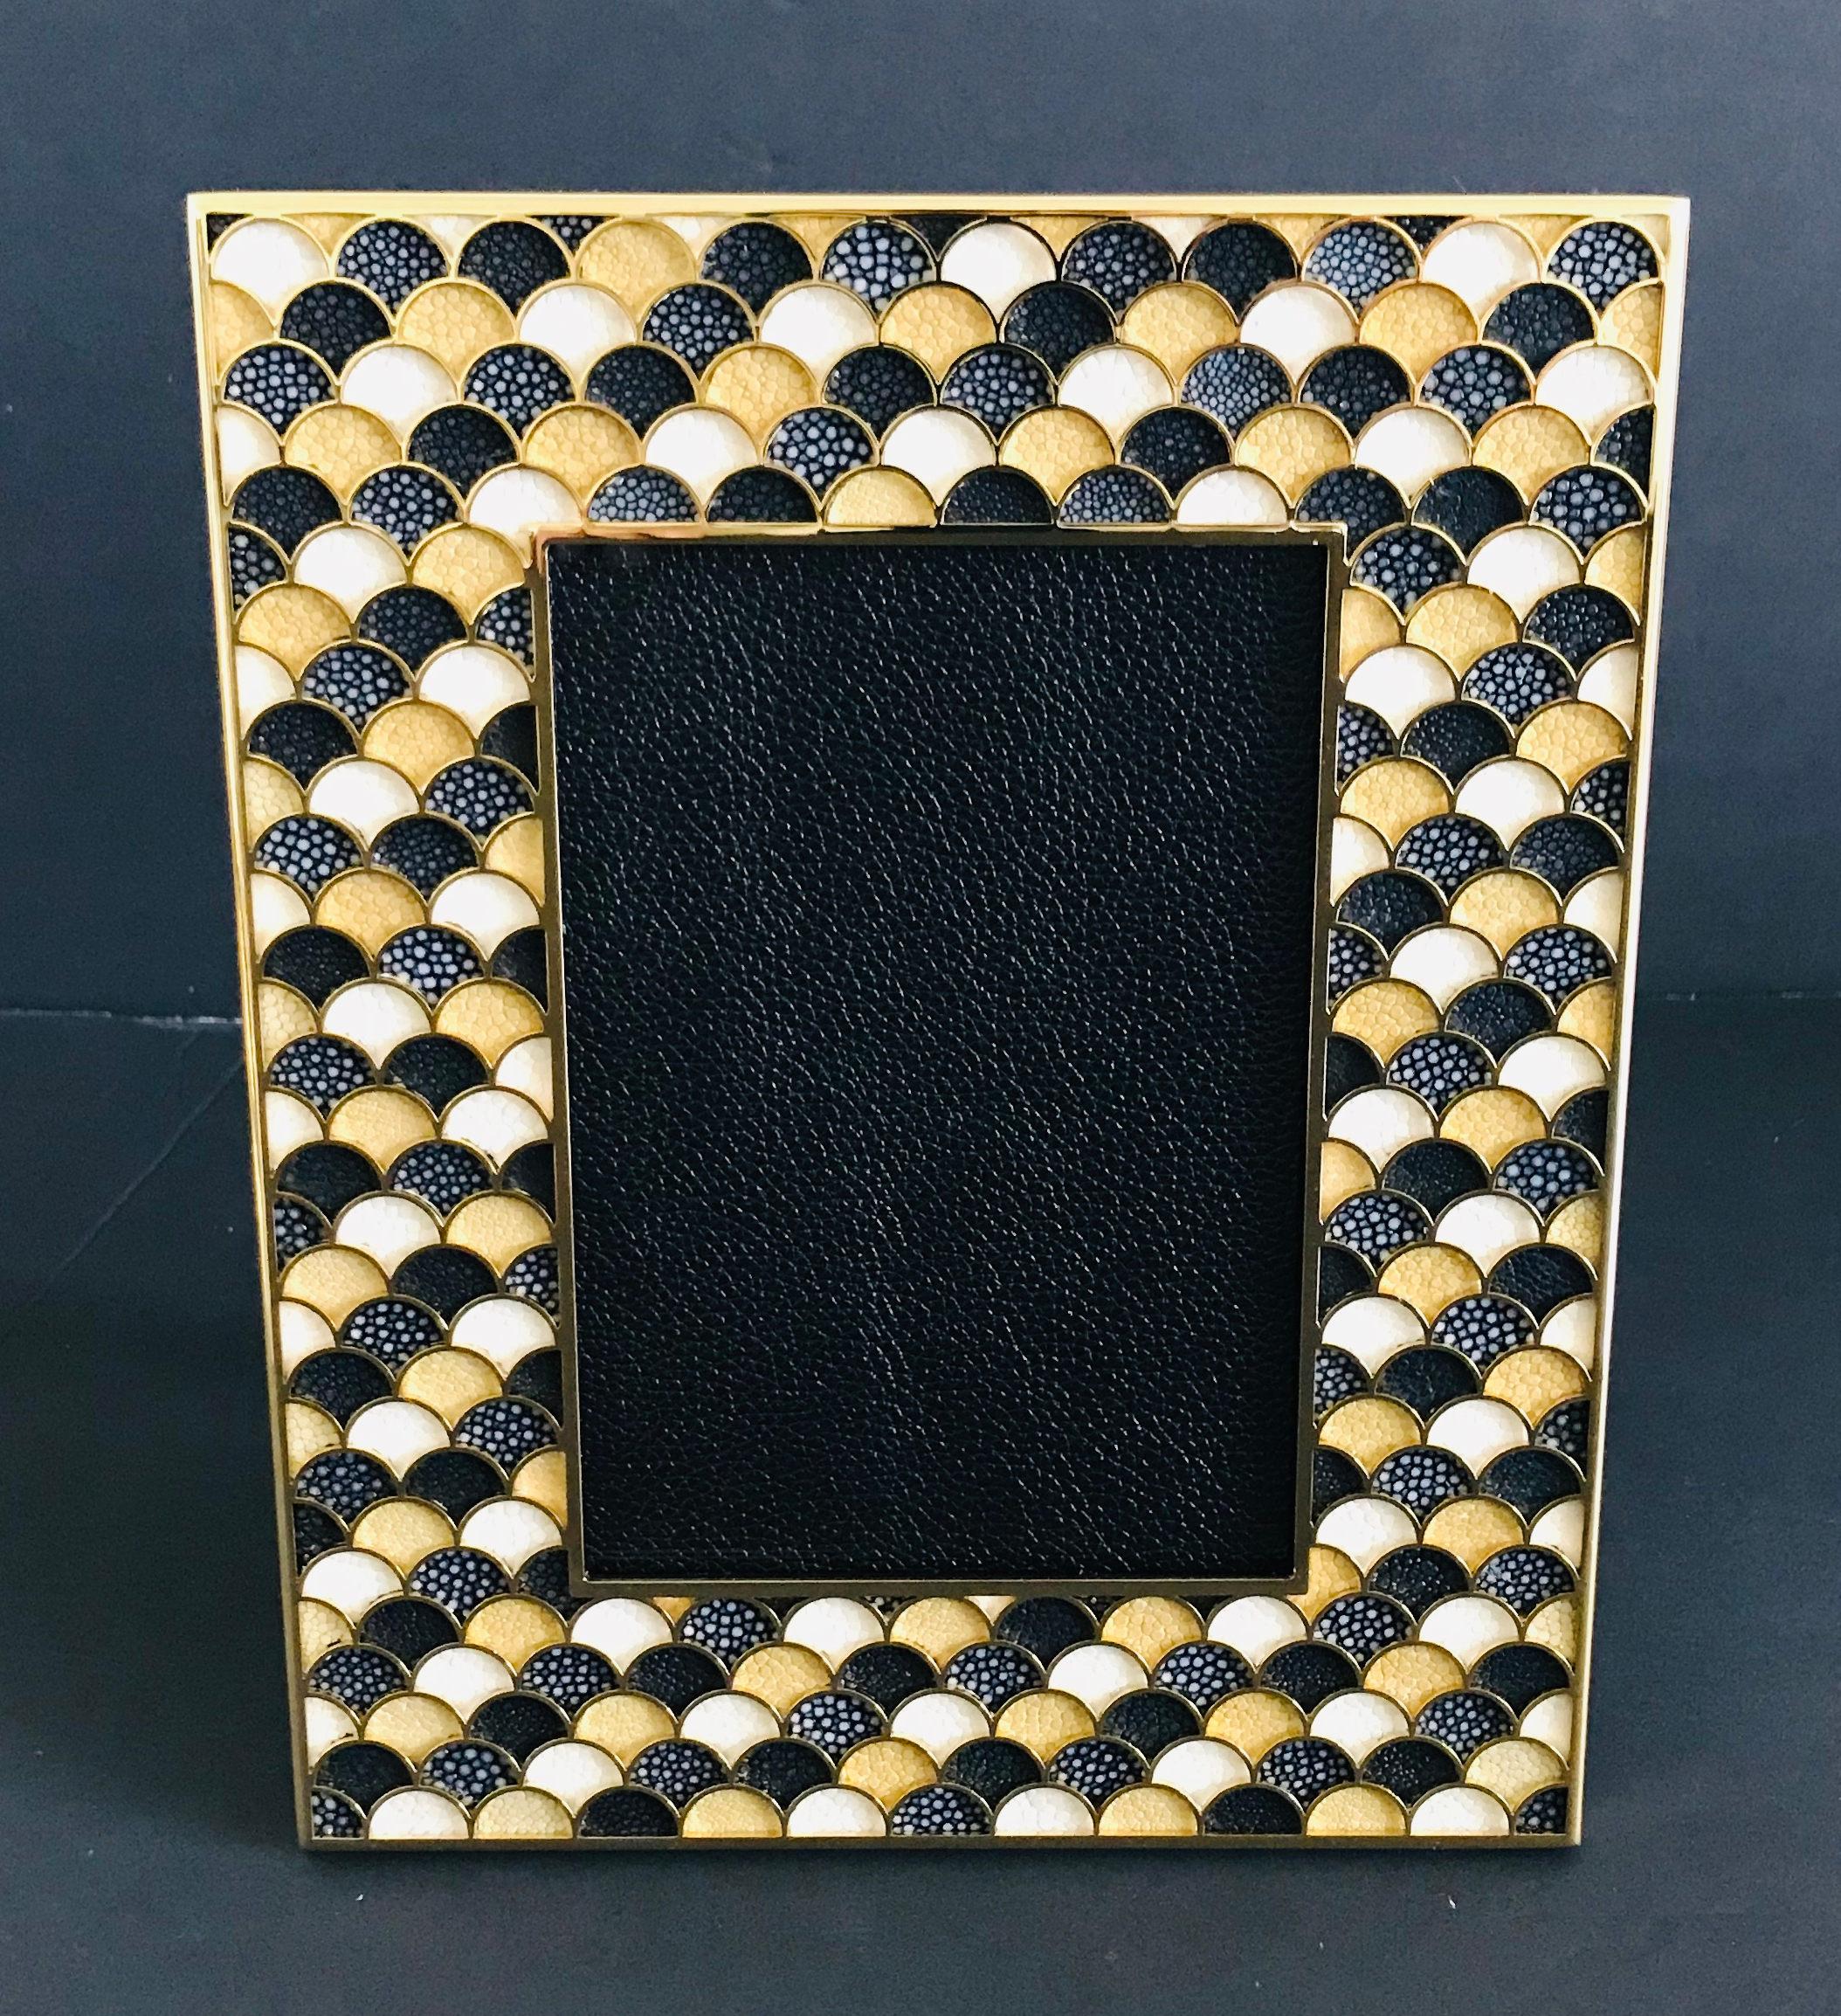 Black, yellow, and ivory shagreen leather and 24-karat gold-plated photo frame by Fabio Ltd
Height: 10.5 inches / Width: 8.5 inches / Depth: 1 inch
Photo size: 5 inches by 7 inches
LAST 1 in stock in Los Angeles
Order Reference #: FABIOLTD PF24
This